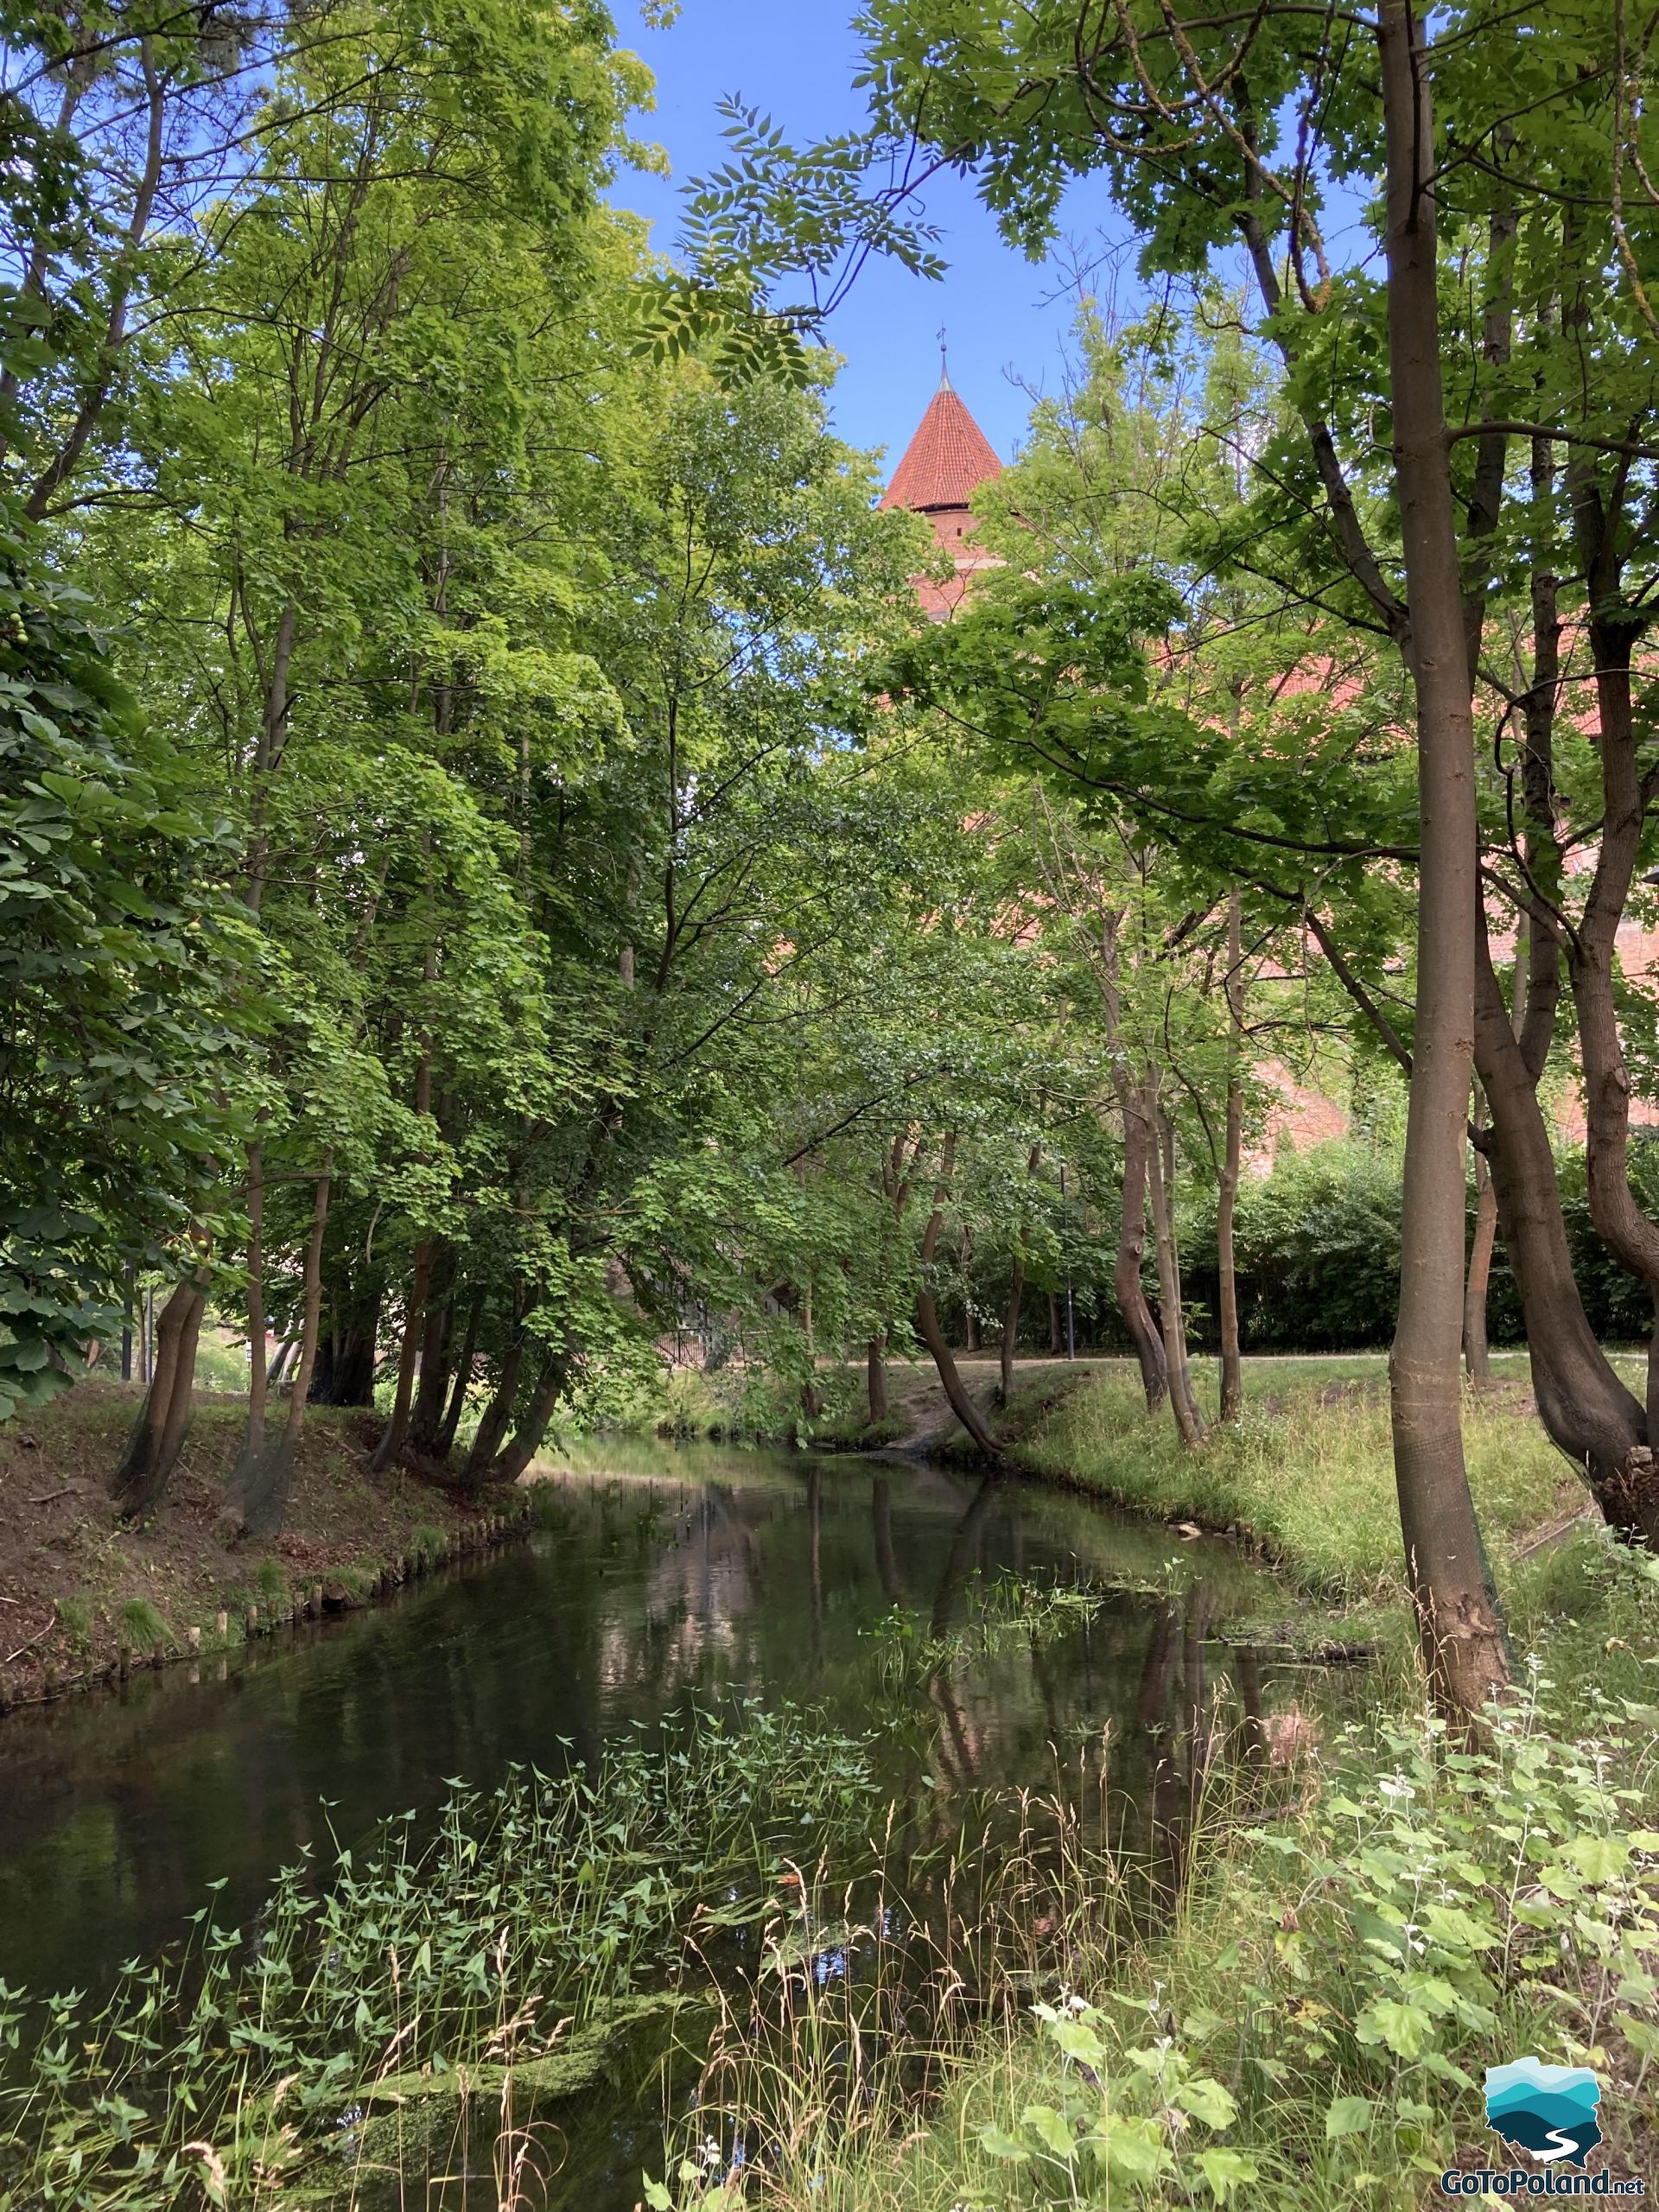 a river flows in the foreground, a castle emerges behind the trees